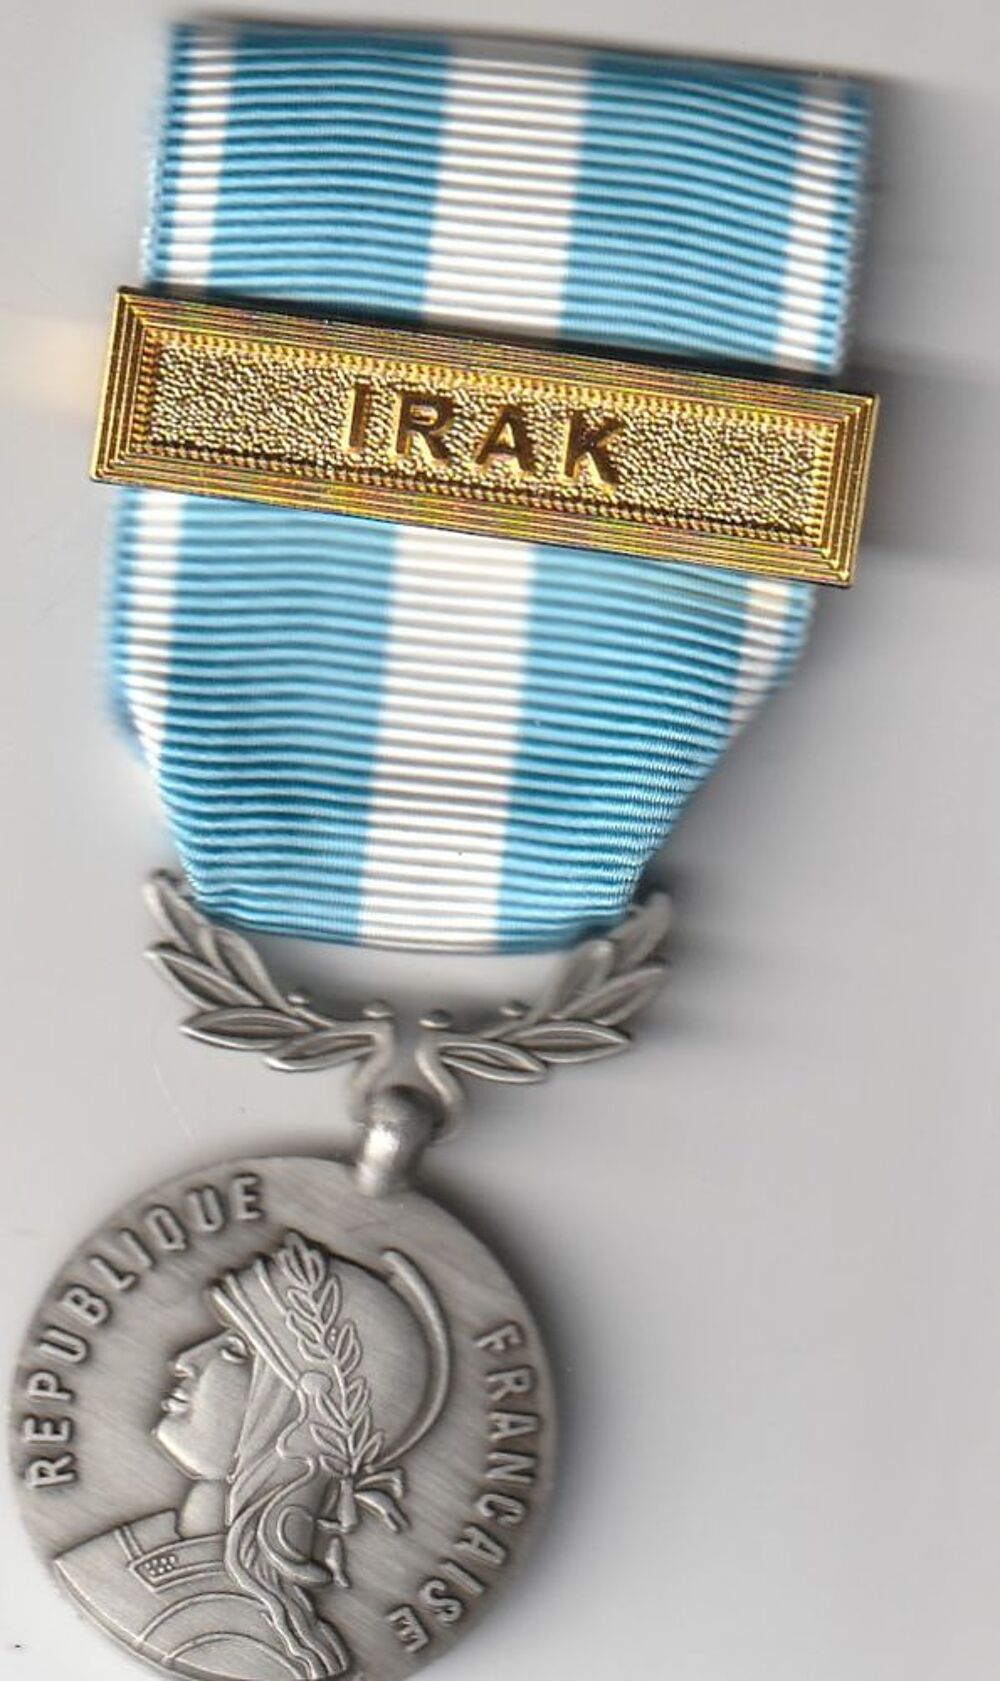 M&eacute;daille Militaire d'outre-Mer Agrafe IRAK 